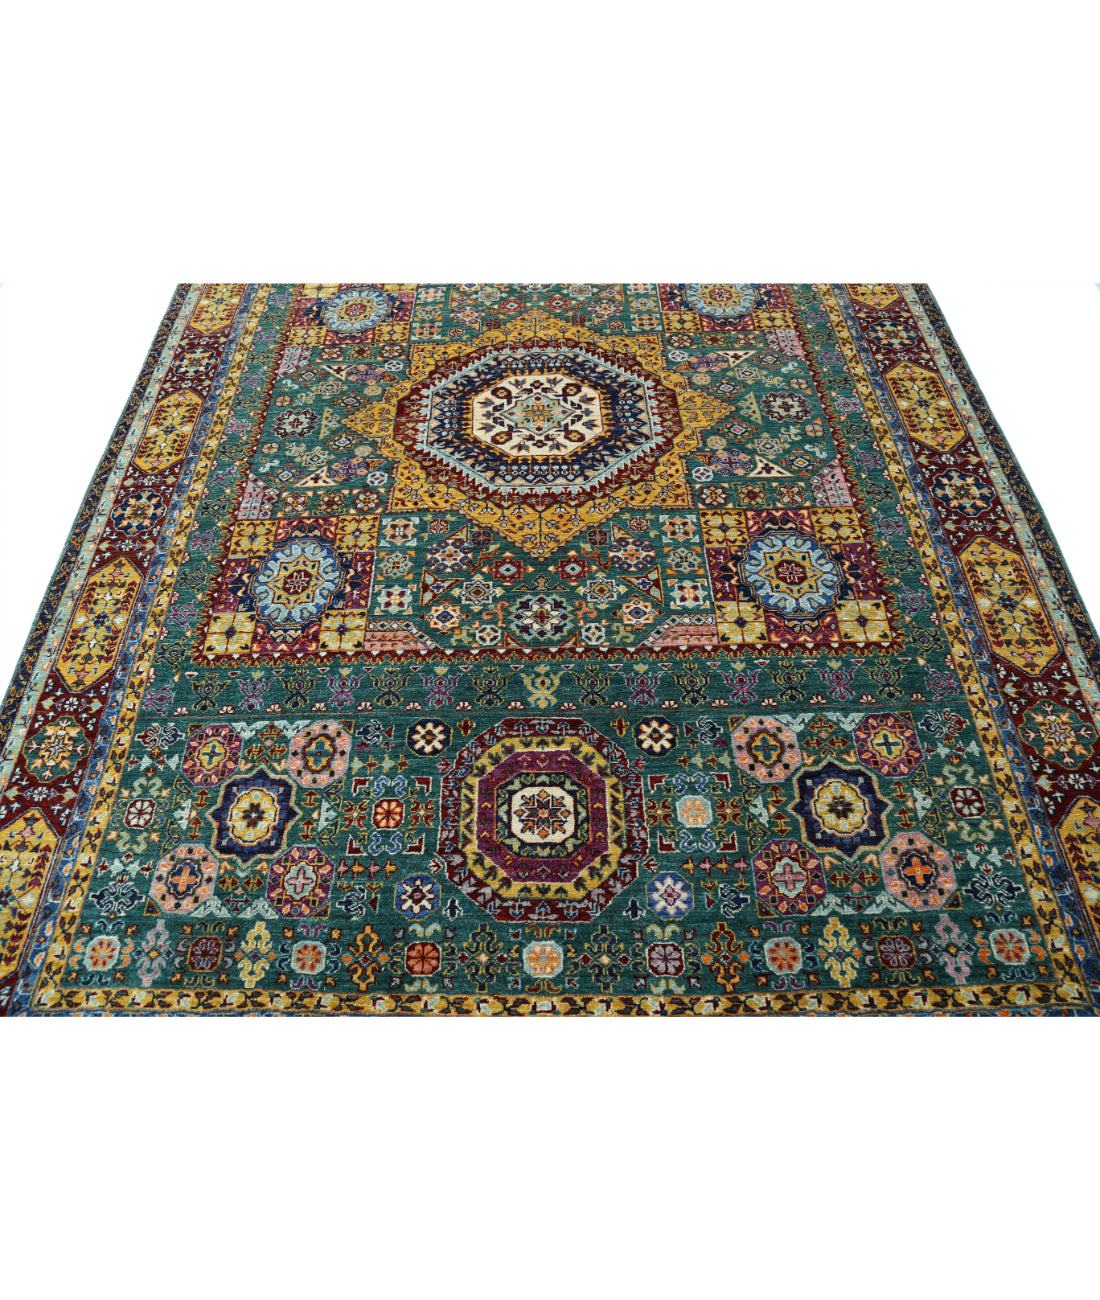 Mamluk 6'9'' X 9'6'' Hand-Knotted Wool Rug 6'9'' x 9'6'' (203 X 285) / Green / Red